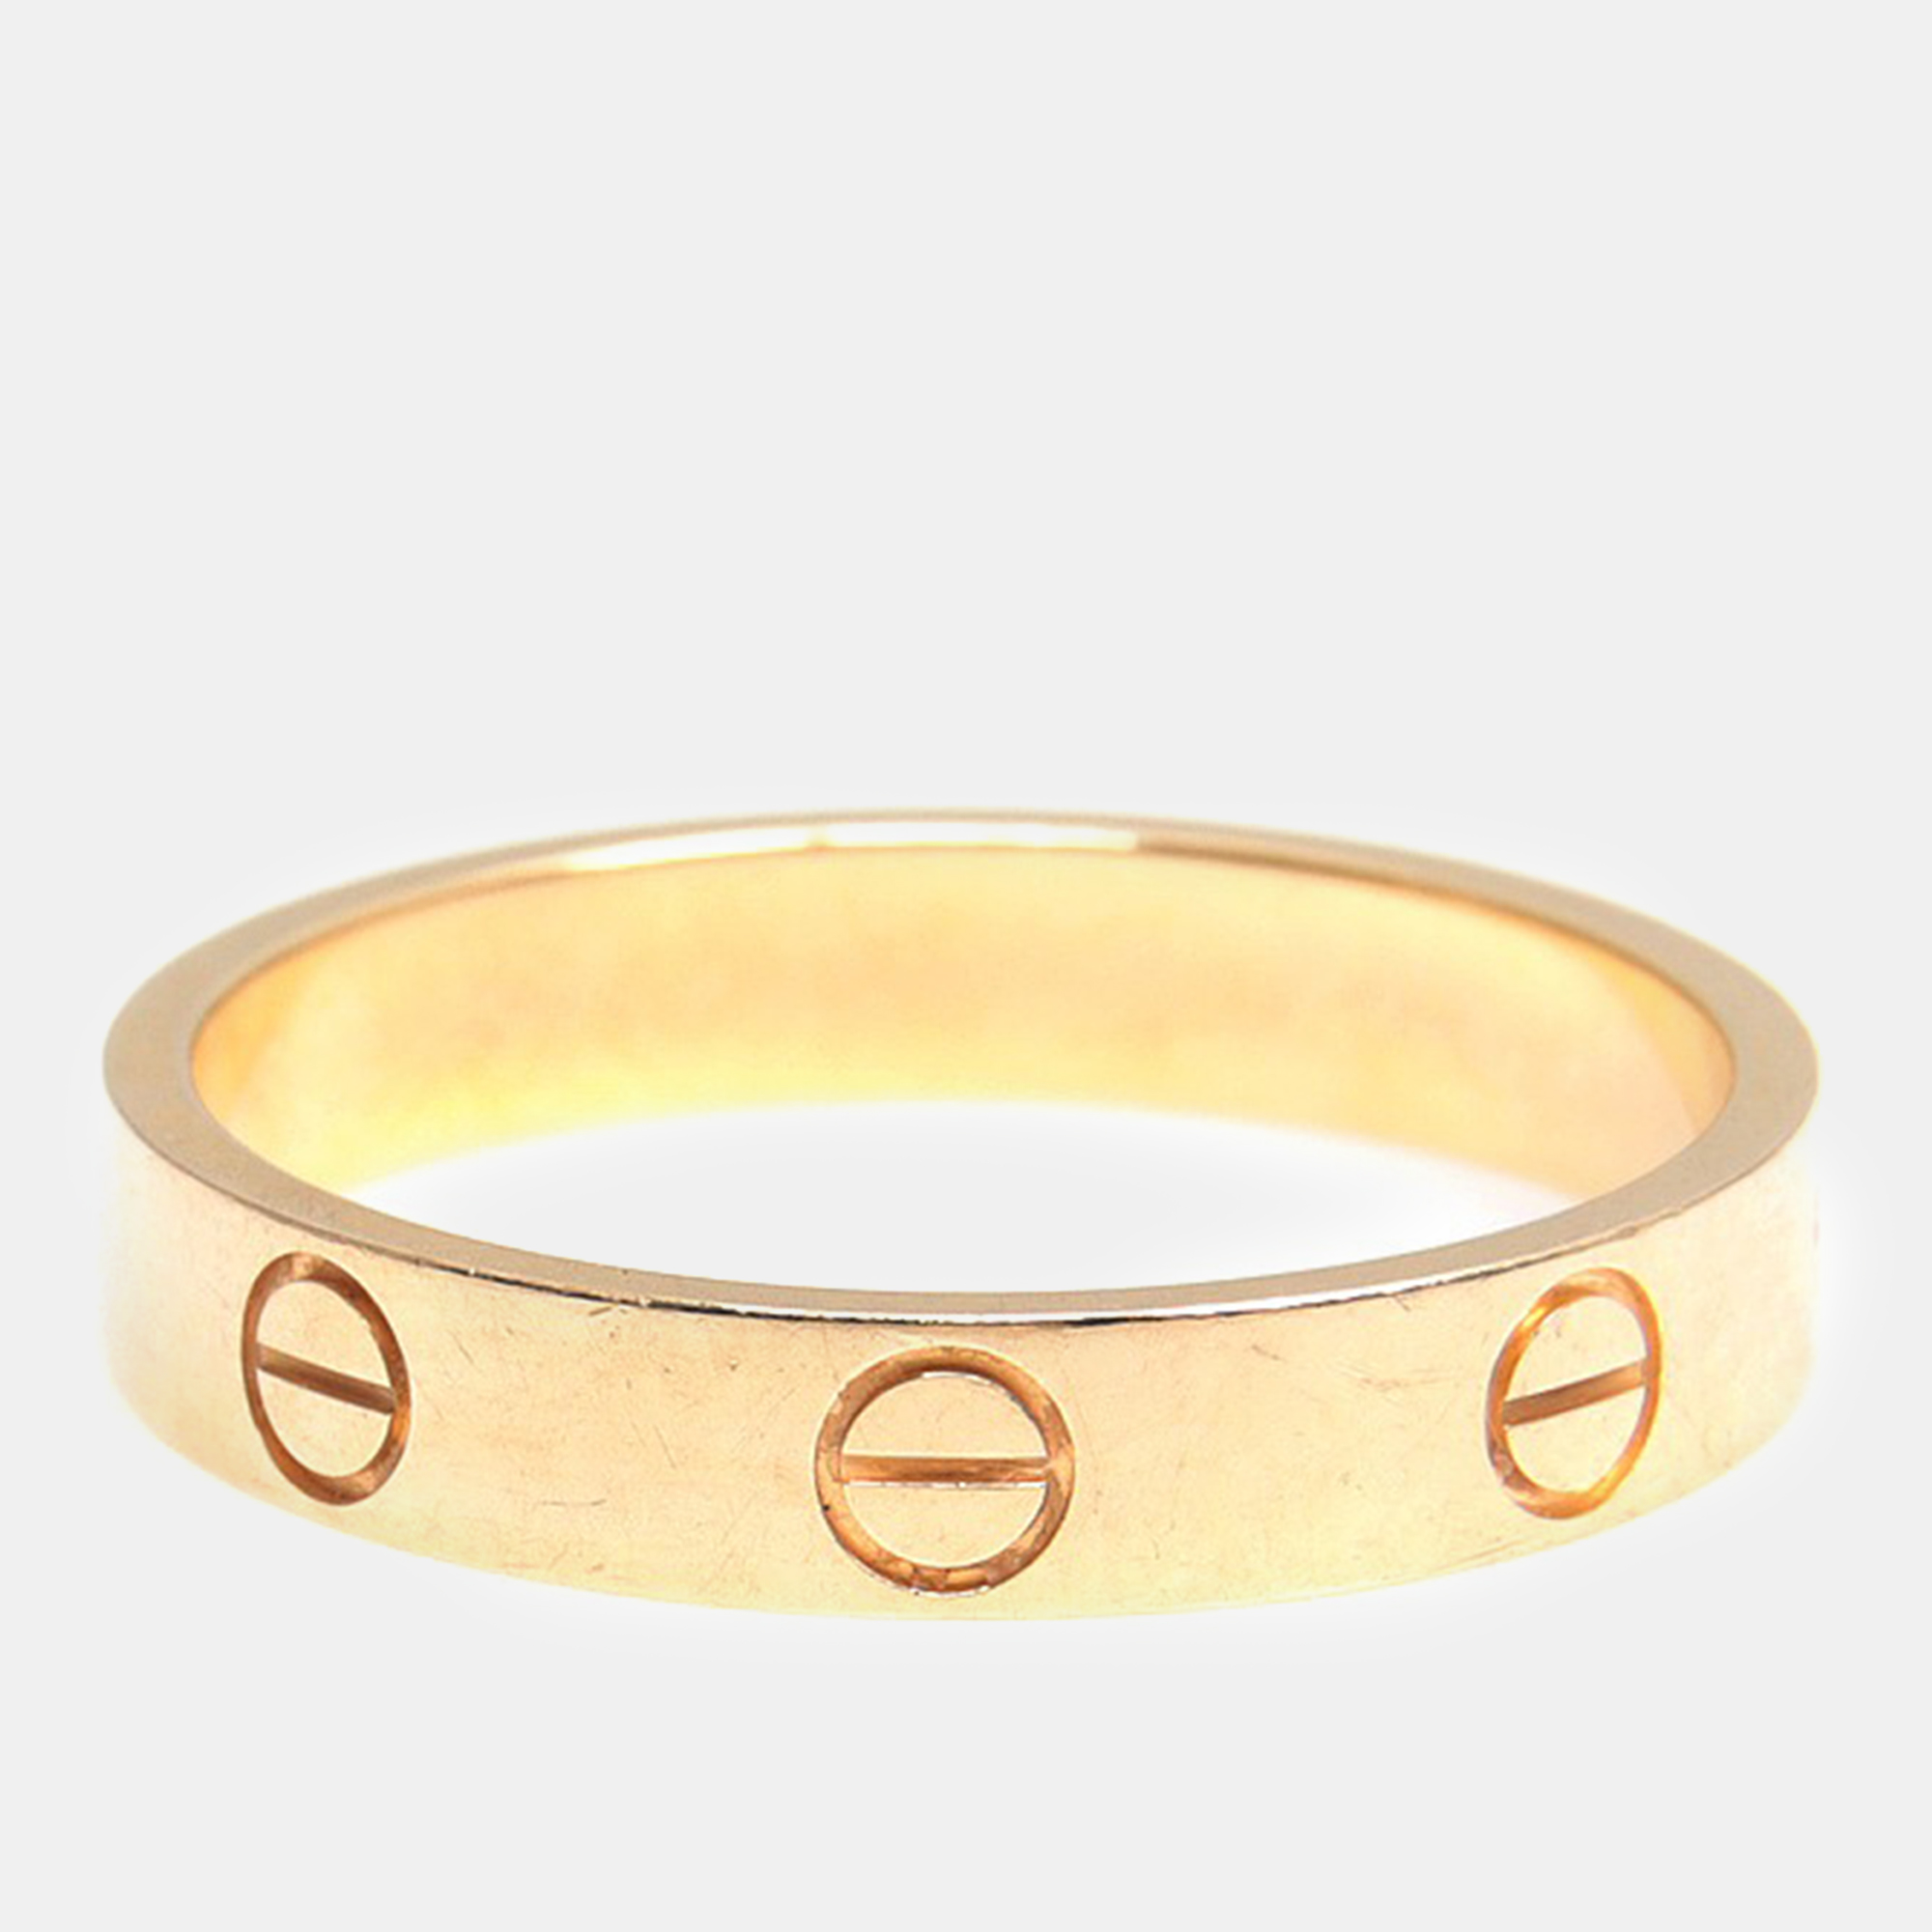 Cartier yellow gold love ring size 16